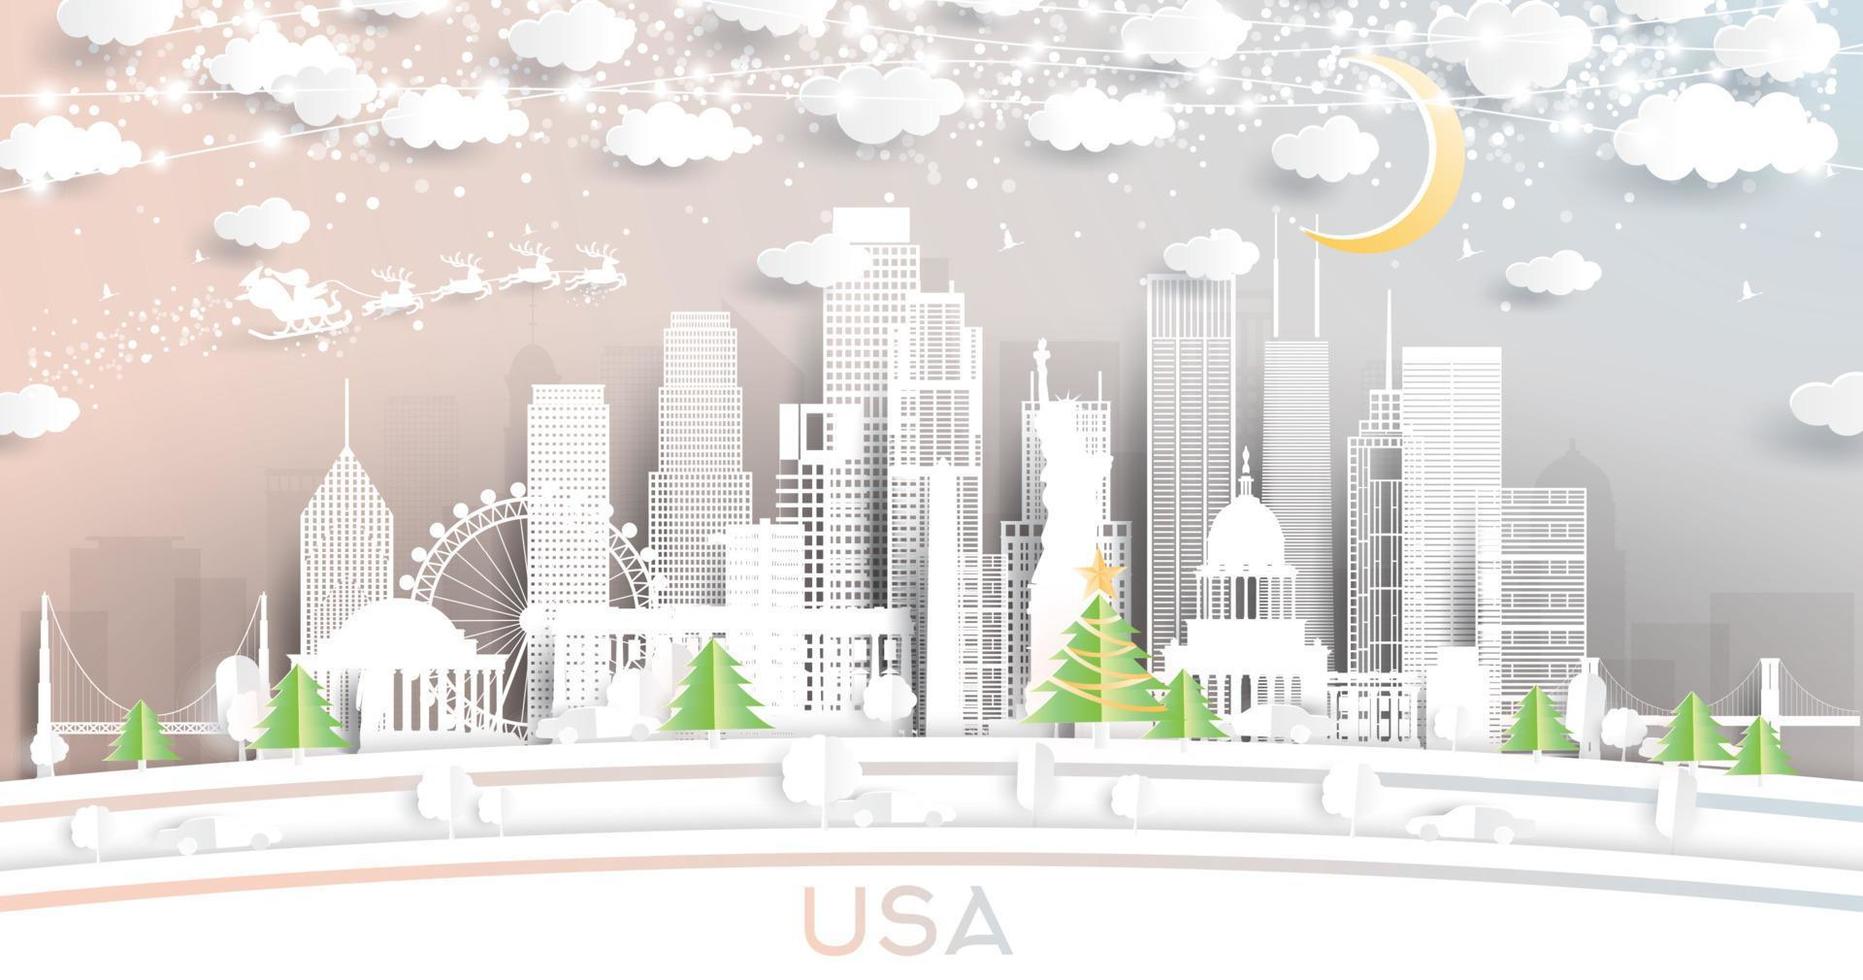 USA City Skyline in Paper Cut Style with Snowflakes, Moon and Neon Garland. vector